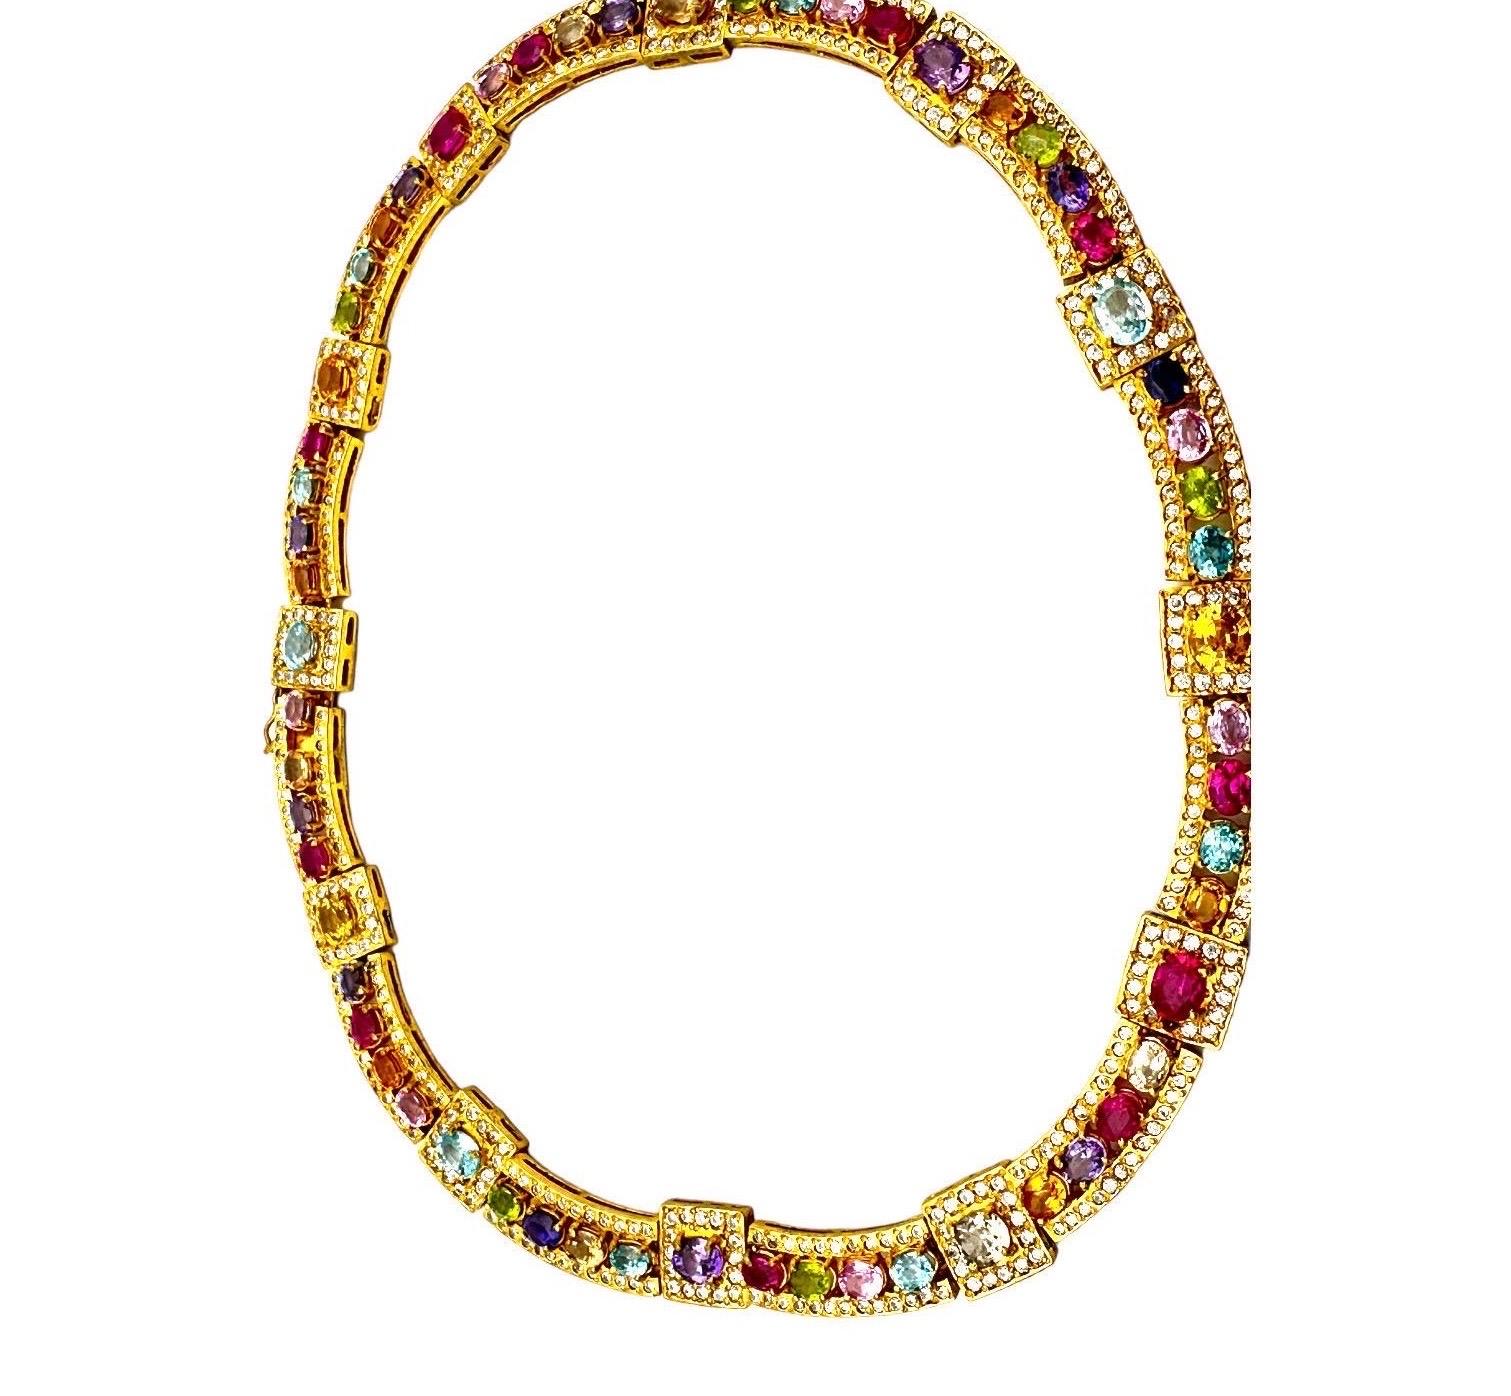 Introducing the Colored Gemstone choker – from the Gemstone pave set halo necklace collection. Featuring a stunning array of colored gemstones delicately placed along a sleek and stylish collar, this is the perfect accessory to take your wardrobe to